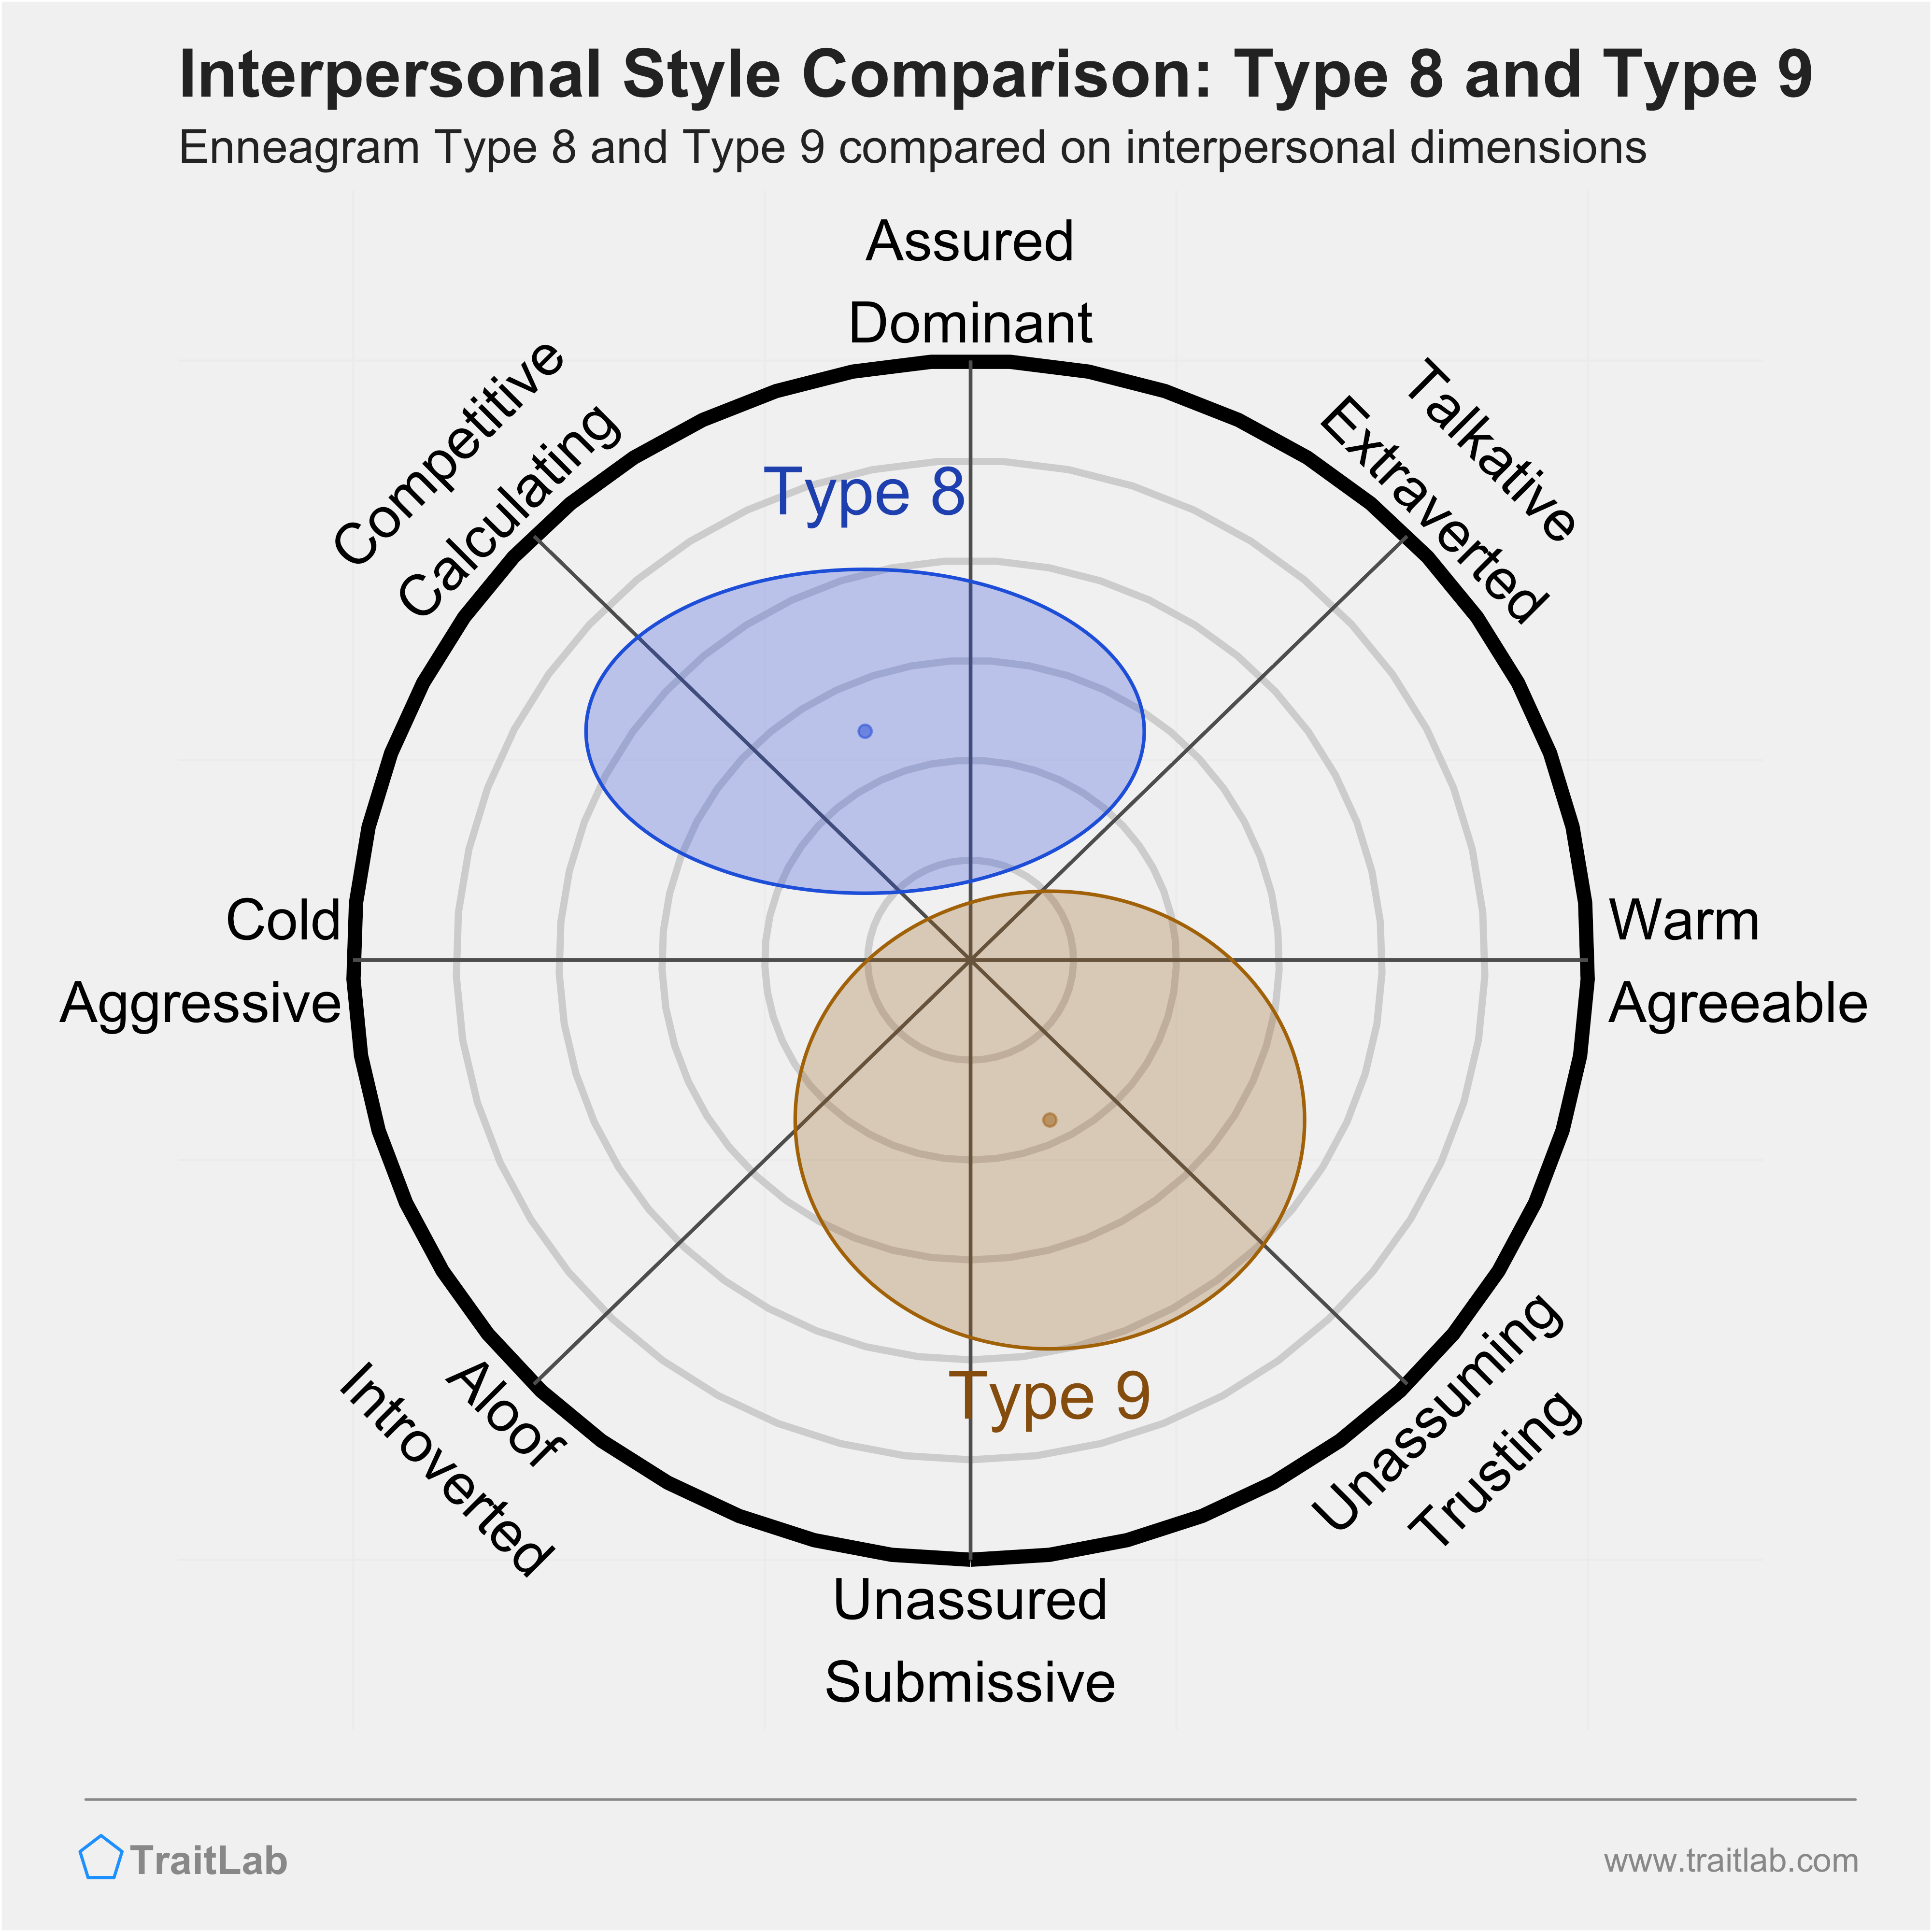 Enneagram Type 8 and Type 9 comparison across interpersonal dimensions